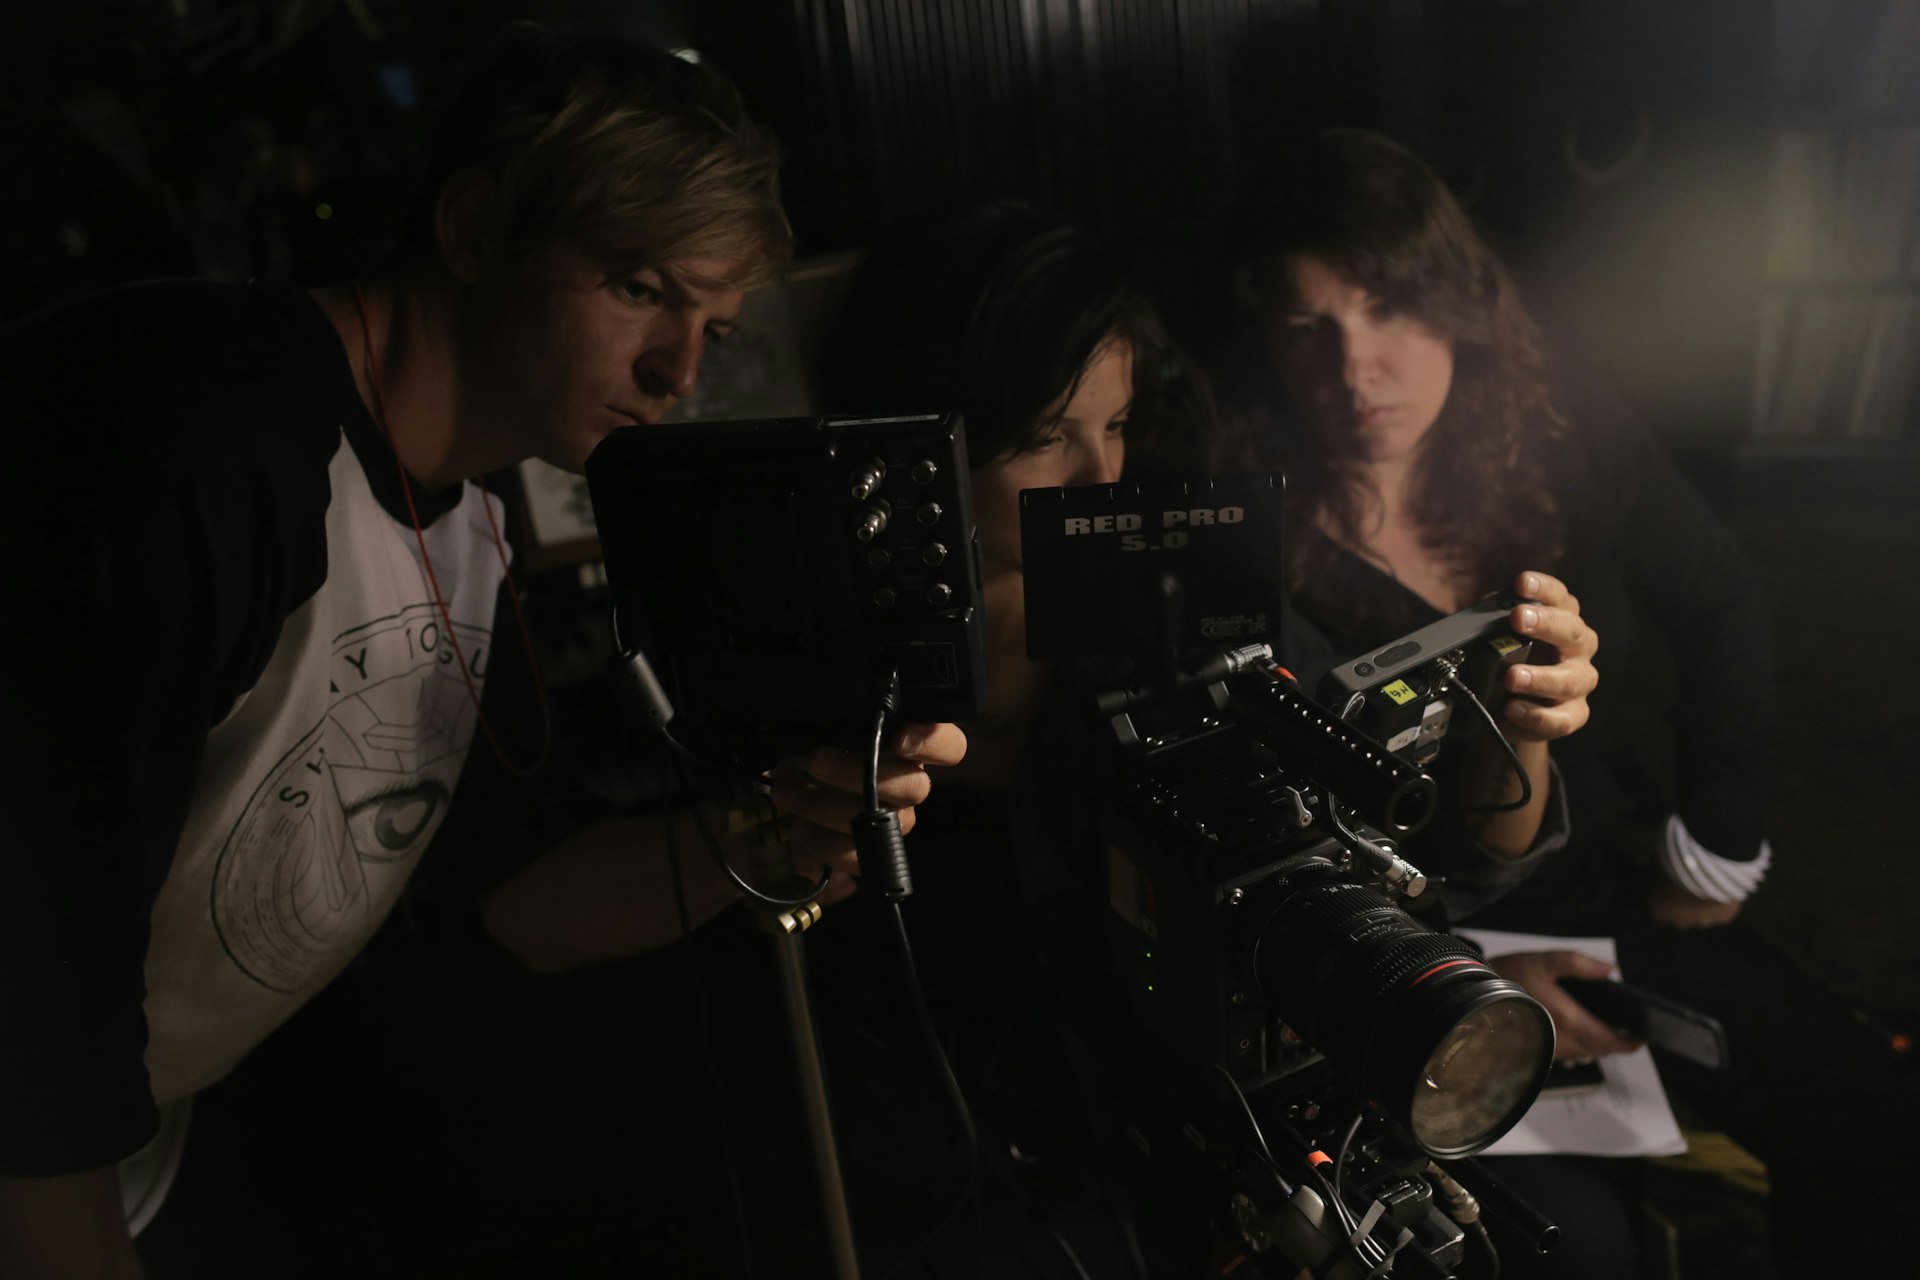 Director Holly Elson and DOP Naiti Gámez on a shoot in New York City.